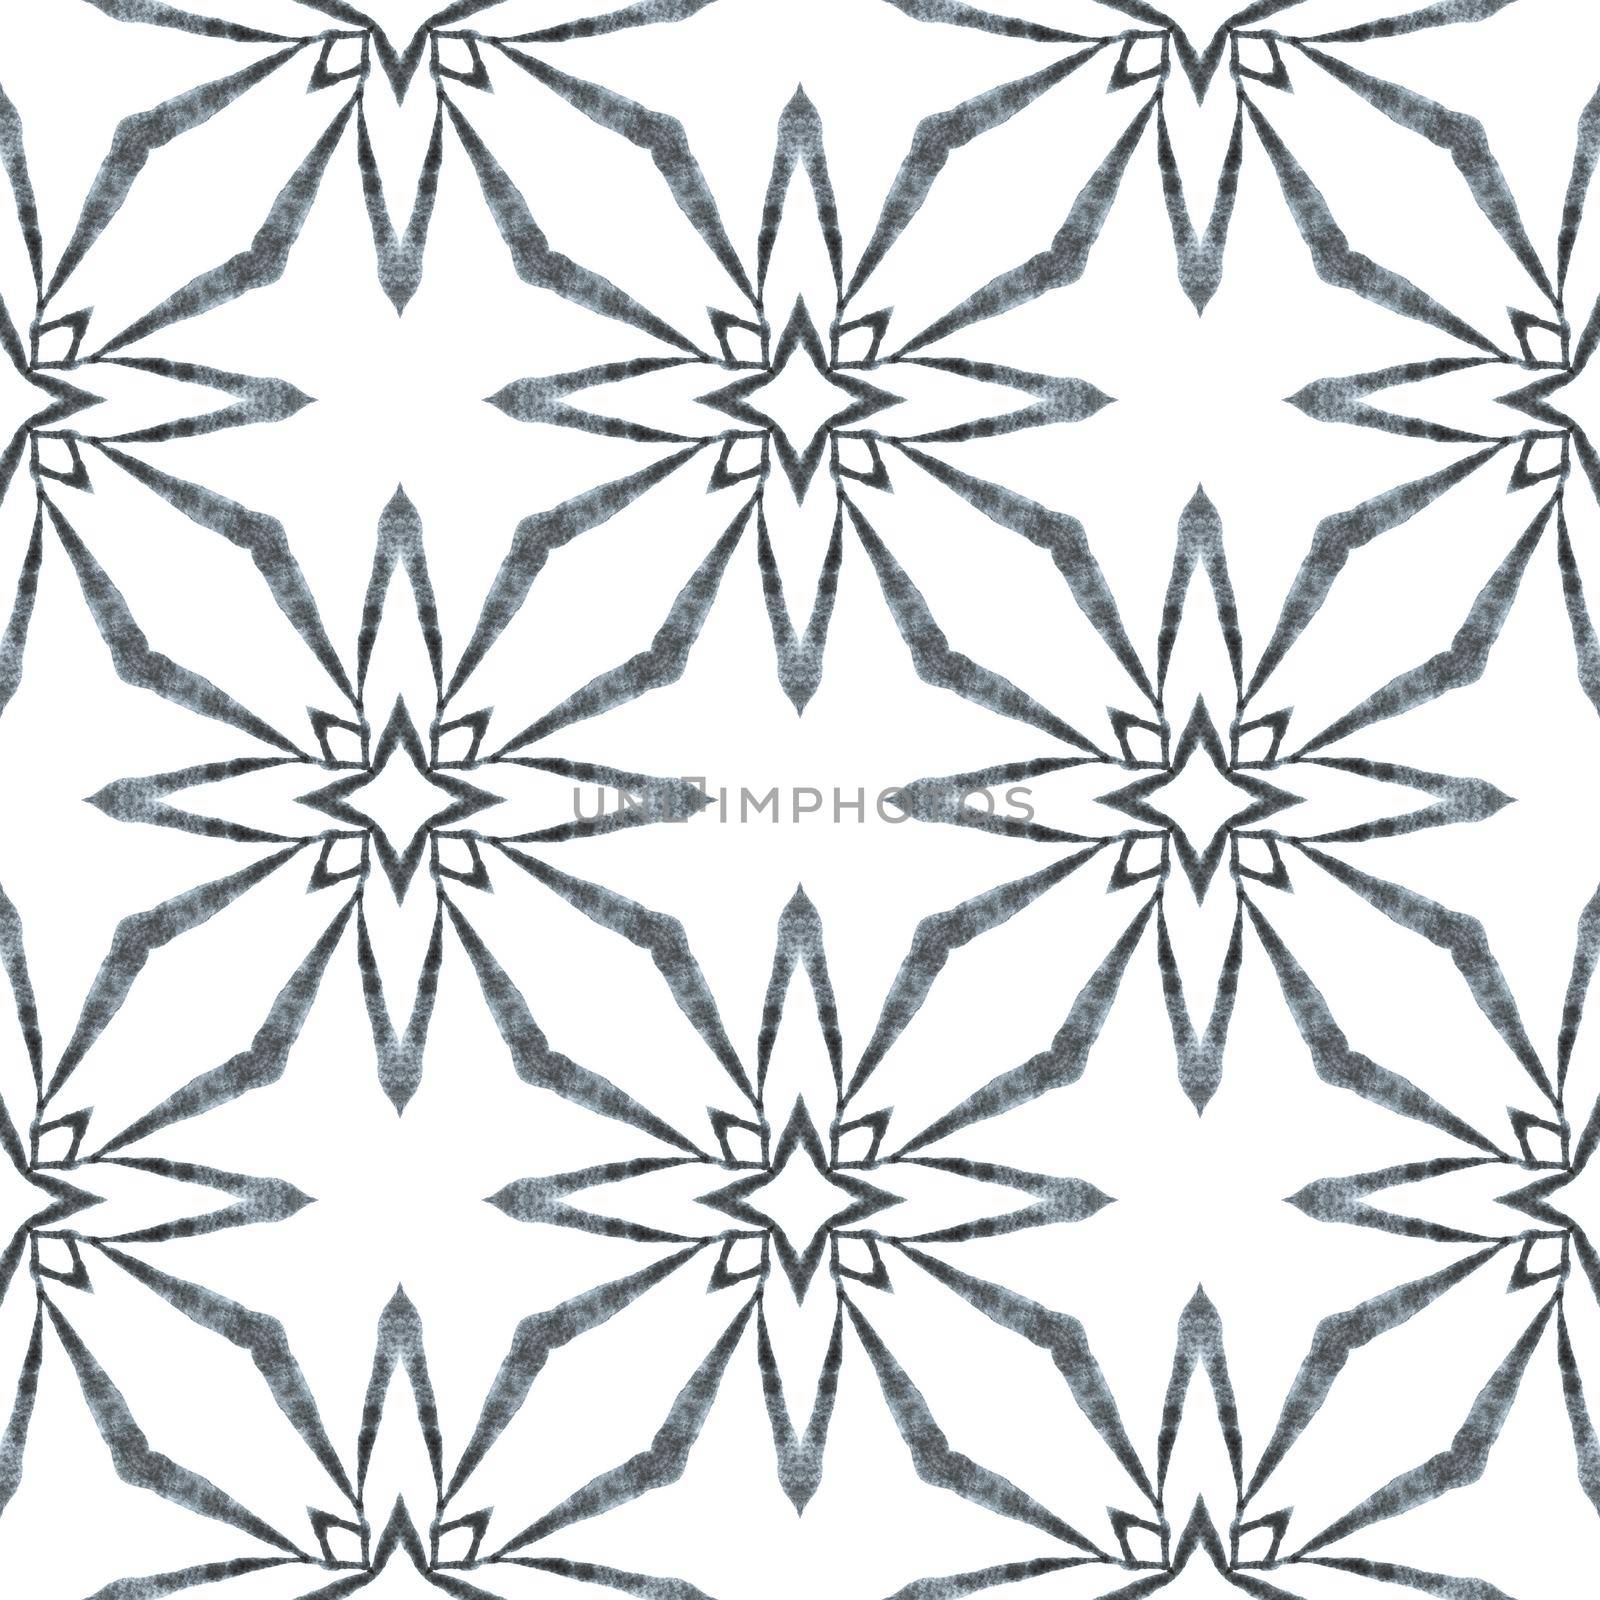 Tiled watercolor background. Black and white indelible boho chic summer design. Hand painted tiled watercolor border. Textile ready pleasing print, swimwear fabric, wallpaper, wrapping.